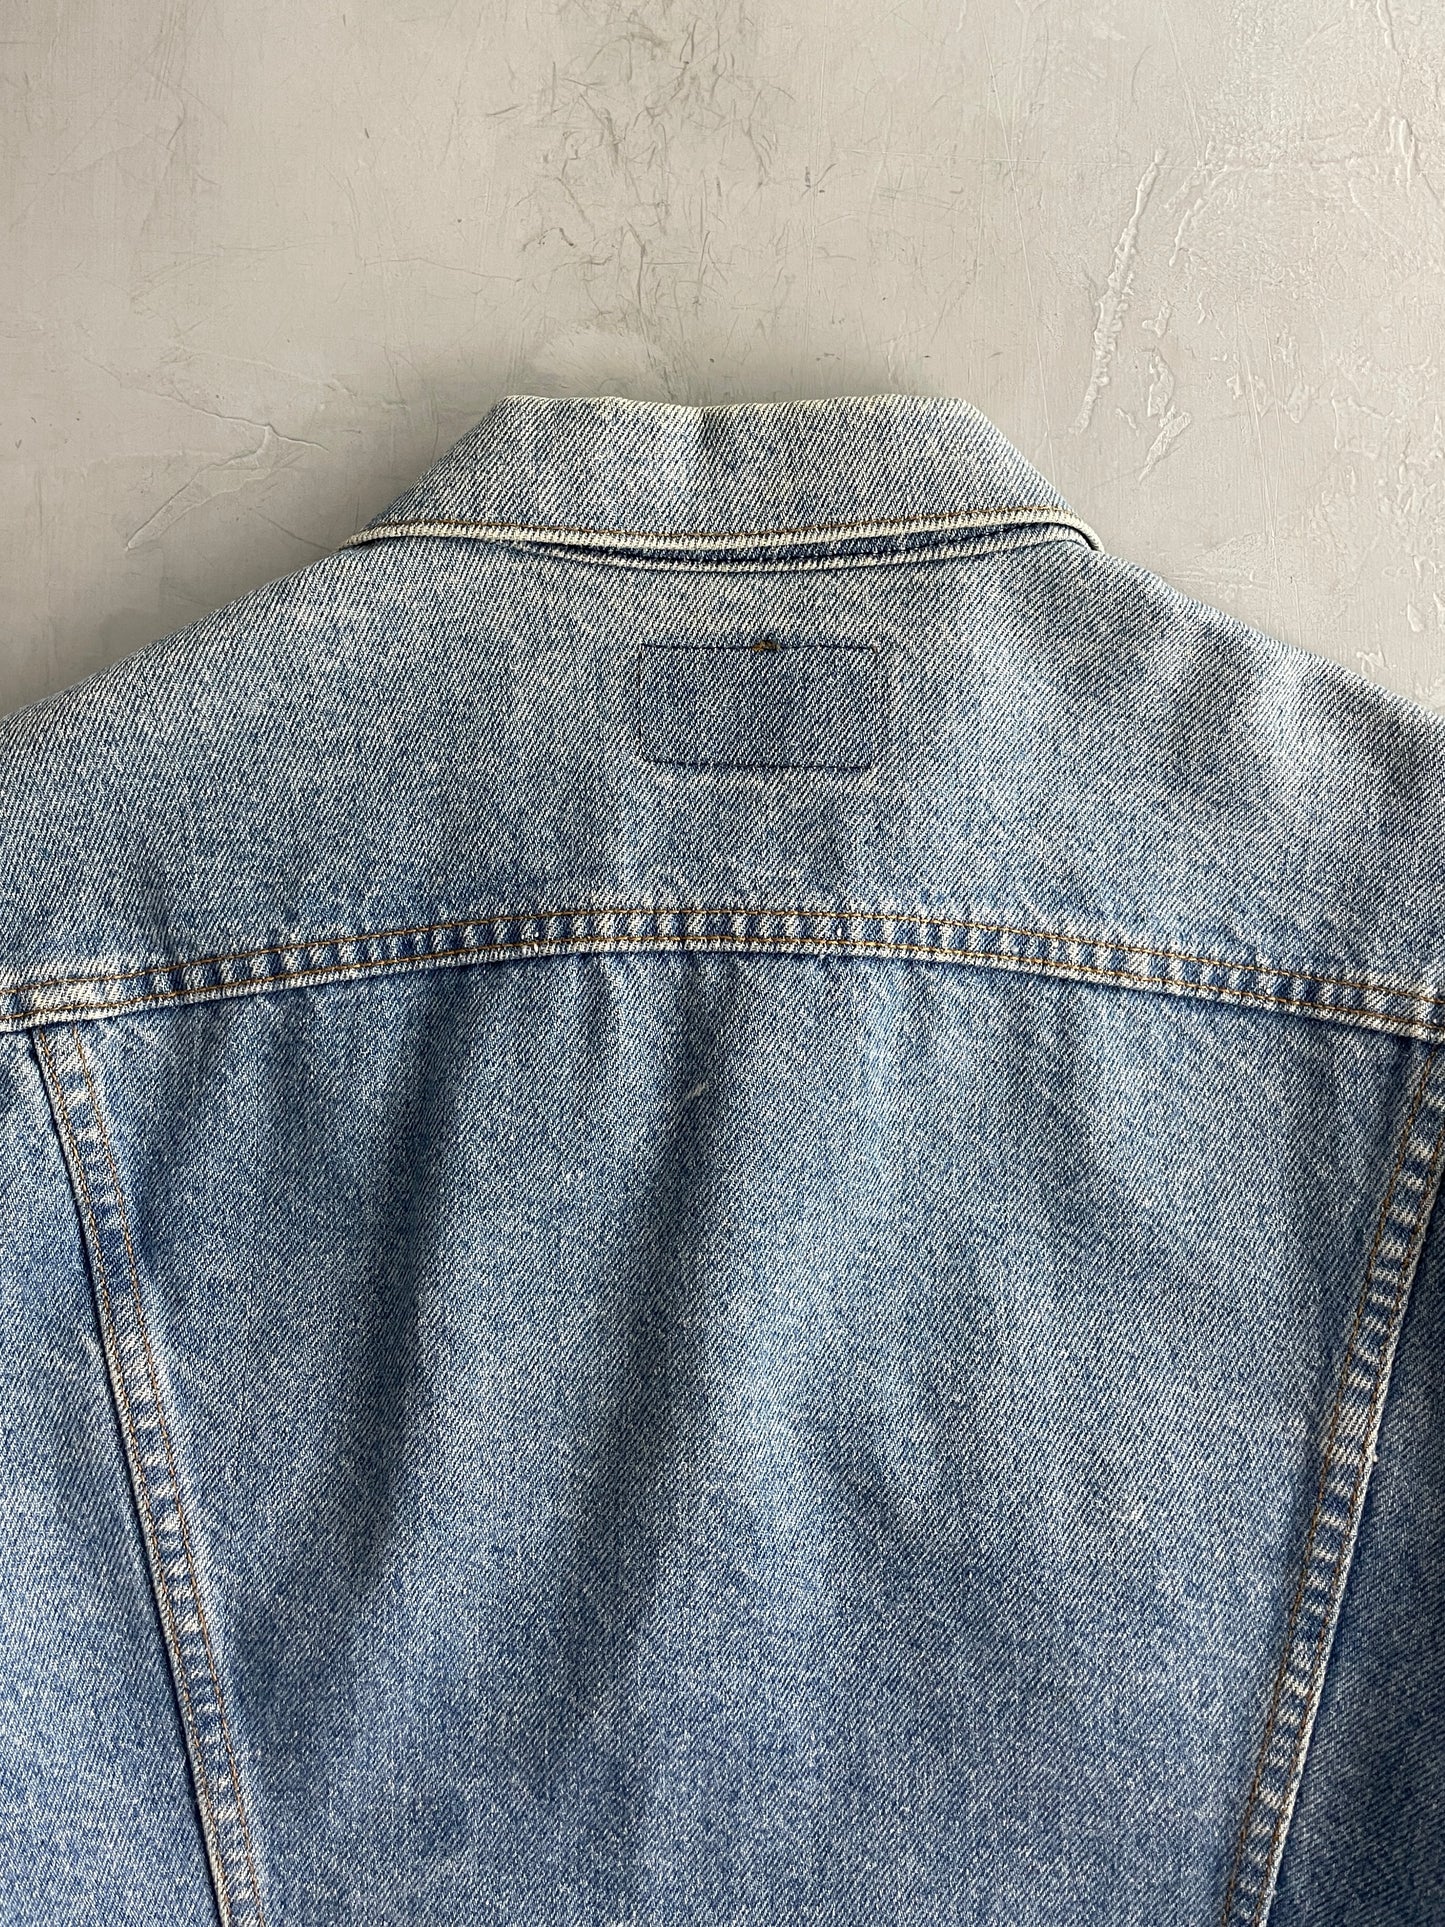 Made in USA Levi's Trucker Jacket [M/L]